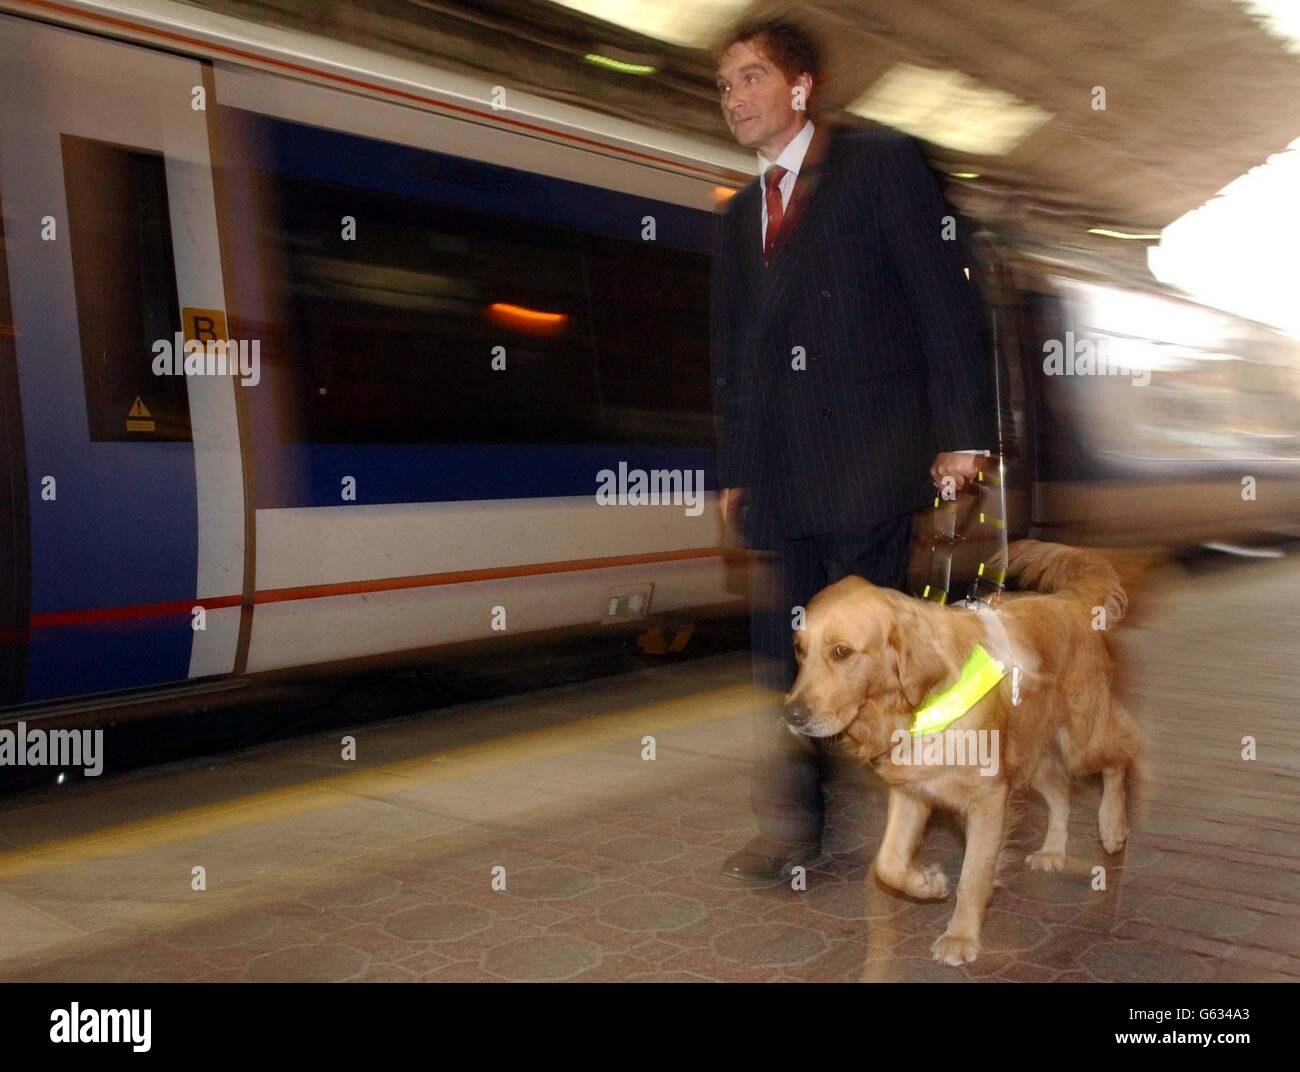 Tom Pey and his guide dog Rupert at London's Marylebone Station, during a photocall to launch the 'Access for All' Campaign by The Guide Dogs for the Blind Association, which aims to make it easier for disabled people to use public transport. Stock Photo